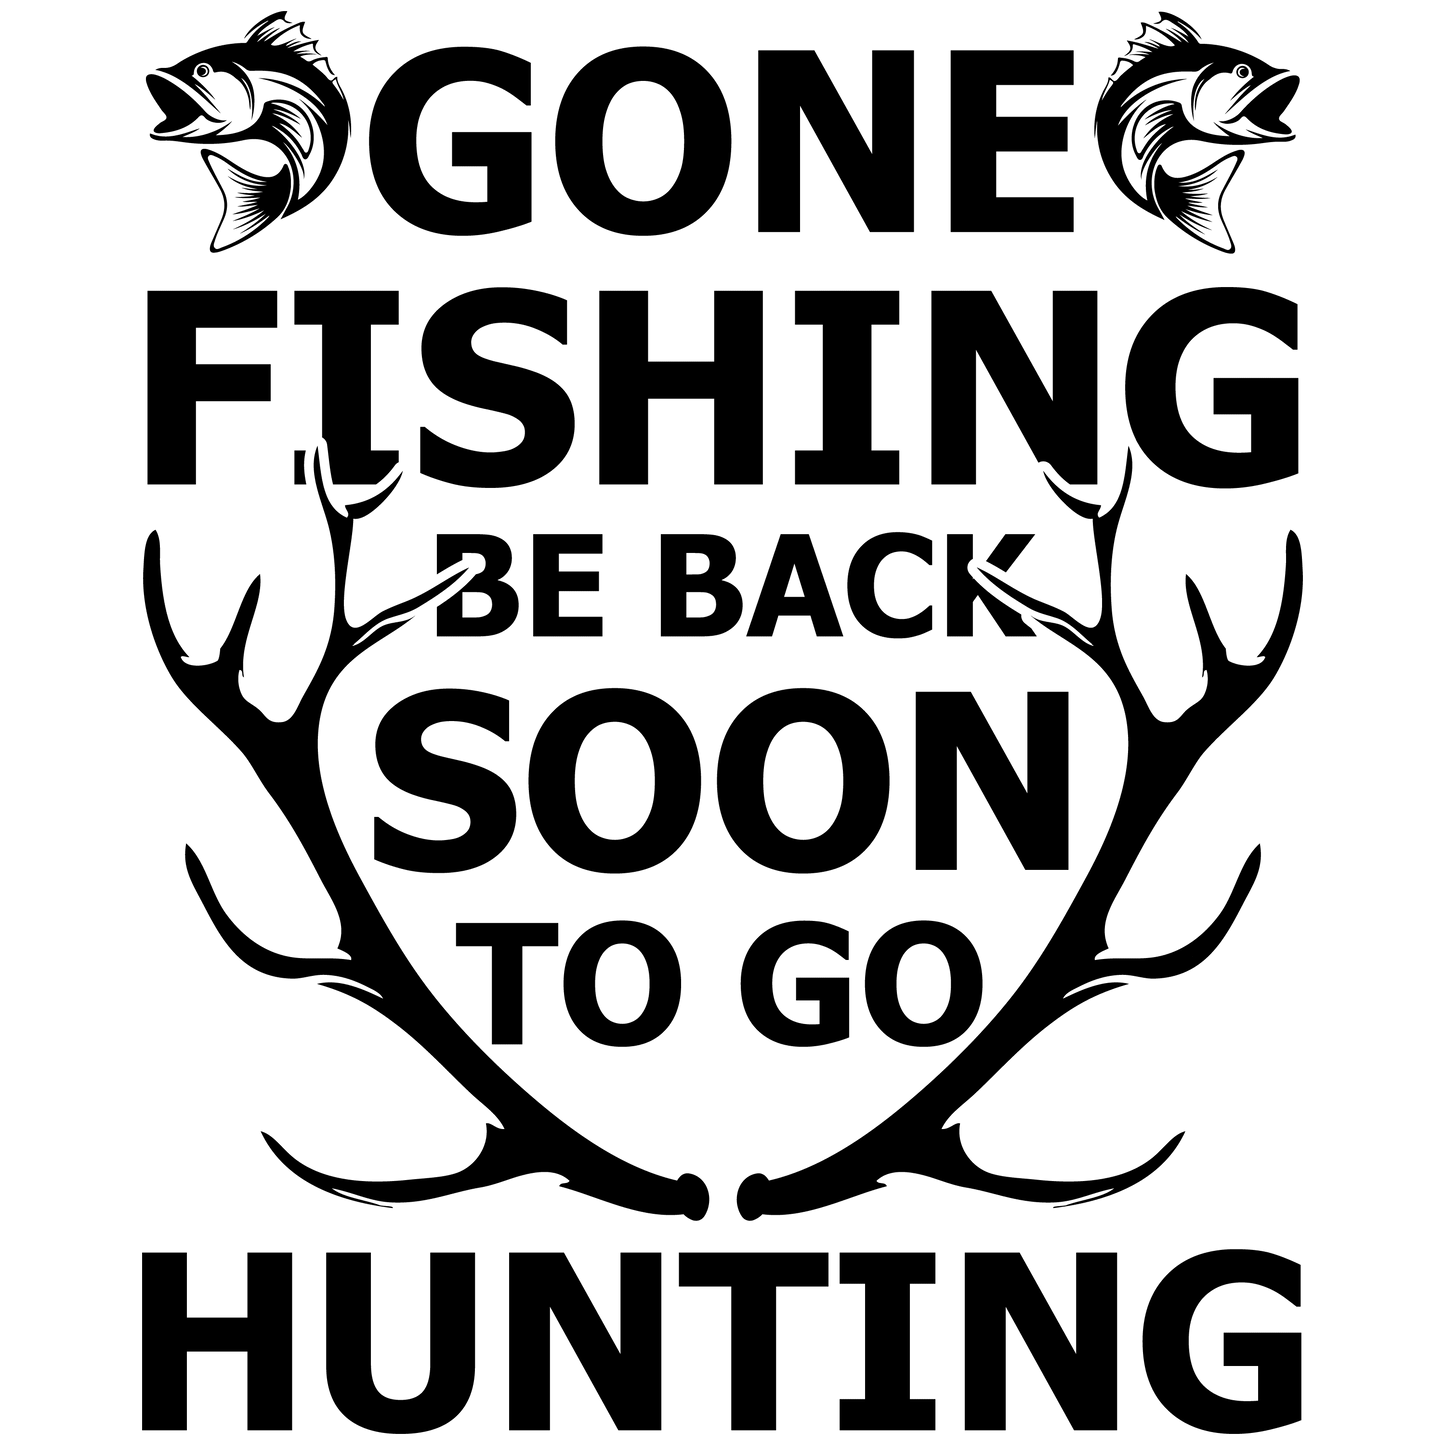 Gone fishing be back soon to go hunting t shirt